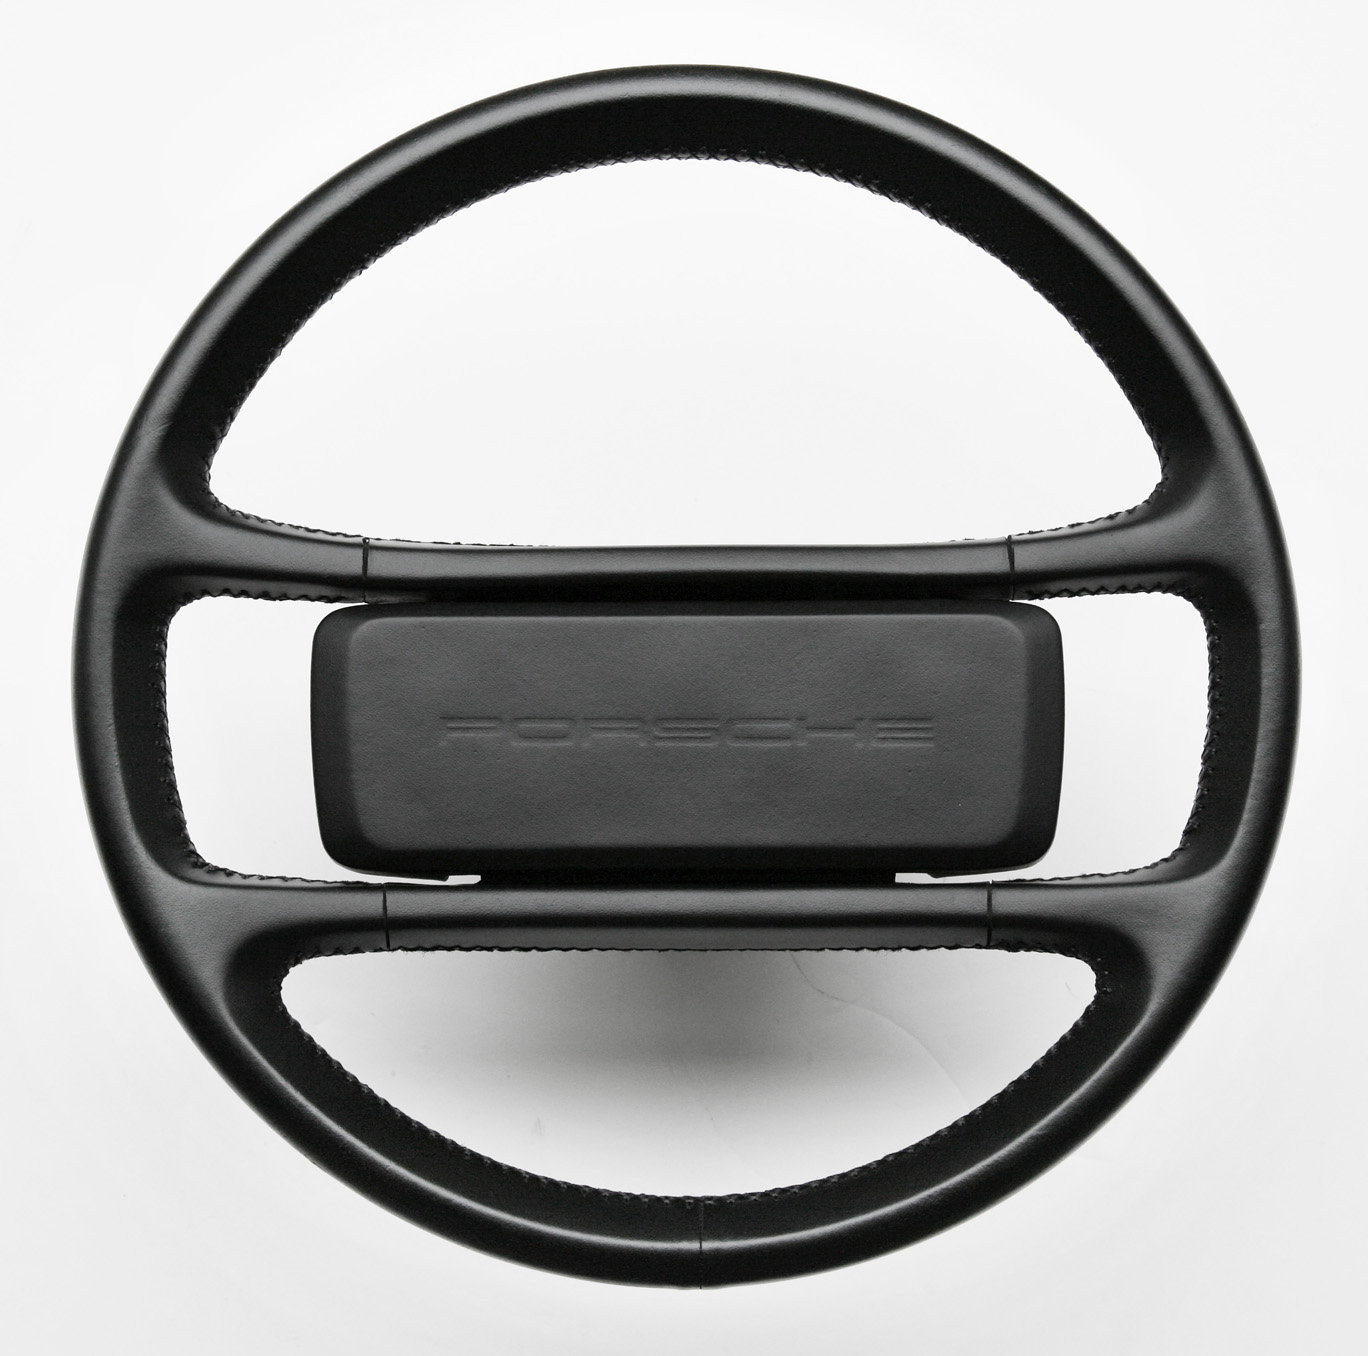 Accessories - Carrera/930 Steering Wheel with EXTENDED HUB - Used - 1984 to 1989 Porsche 911 - Mirror Lake, NH 03853, United States